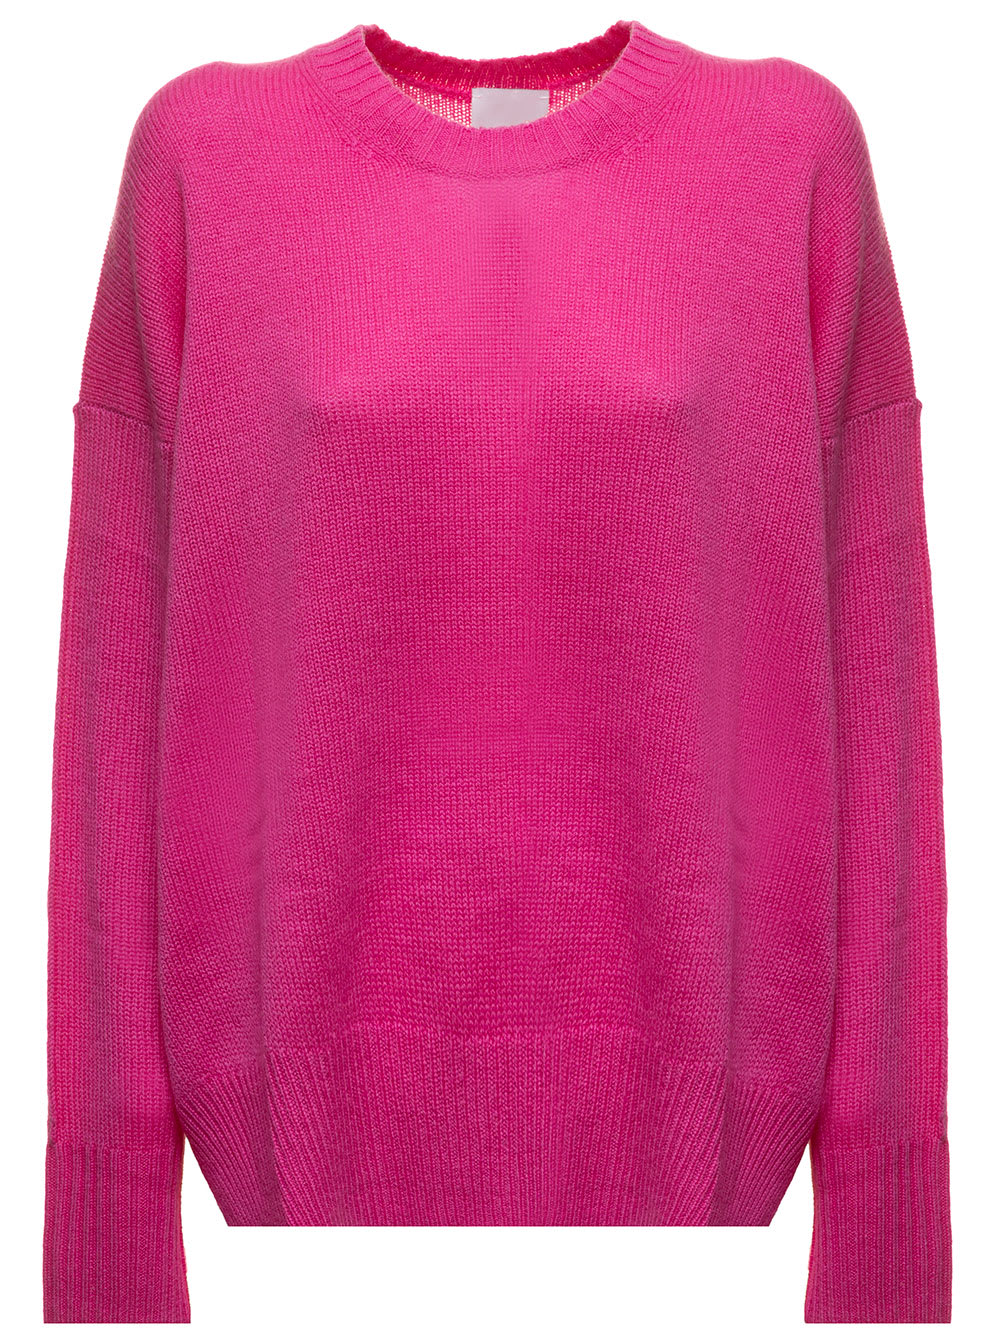 Cashmere Pink Sweater Allude Woman